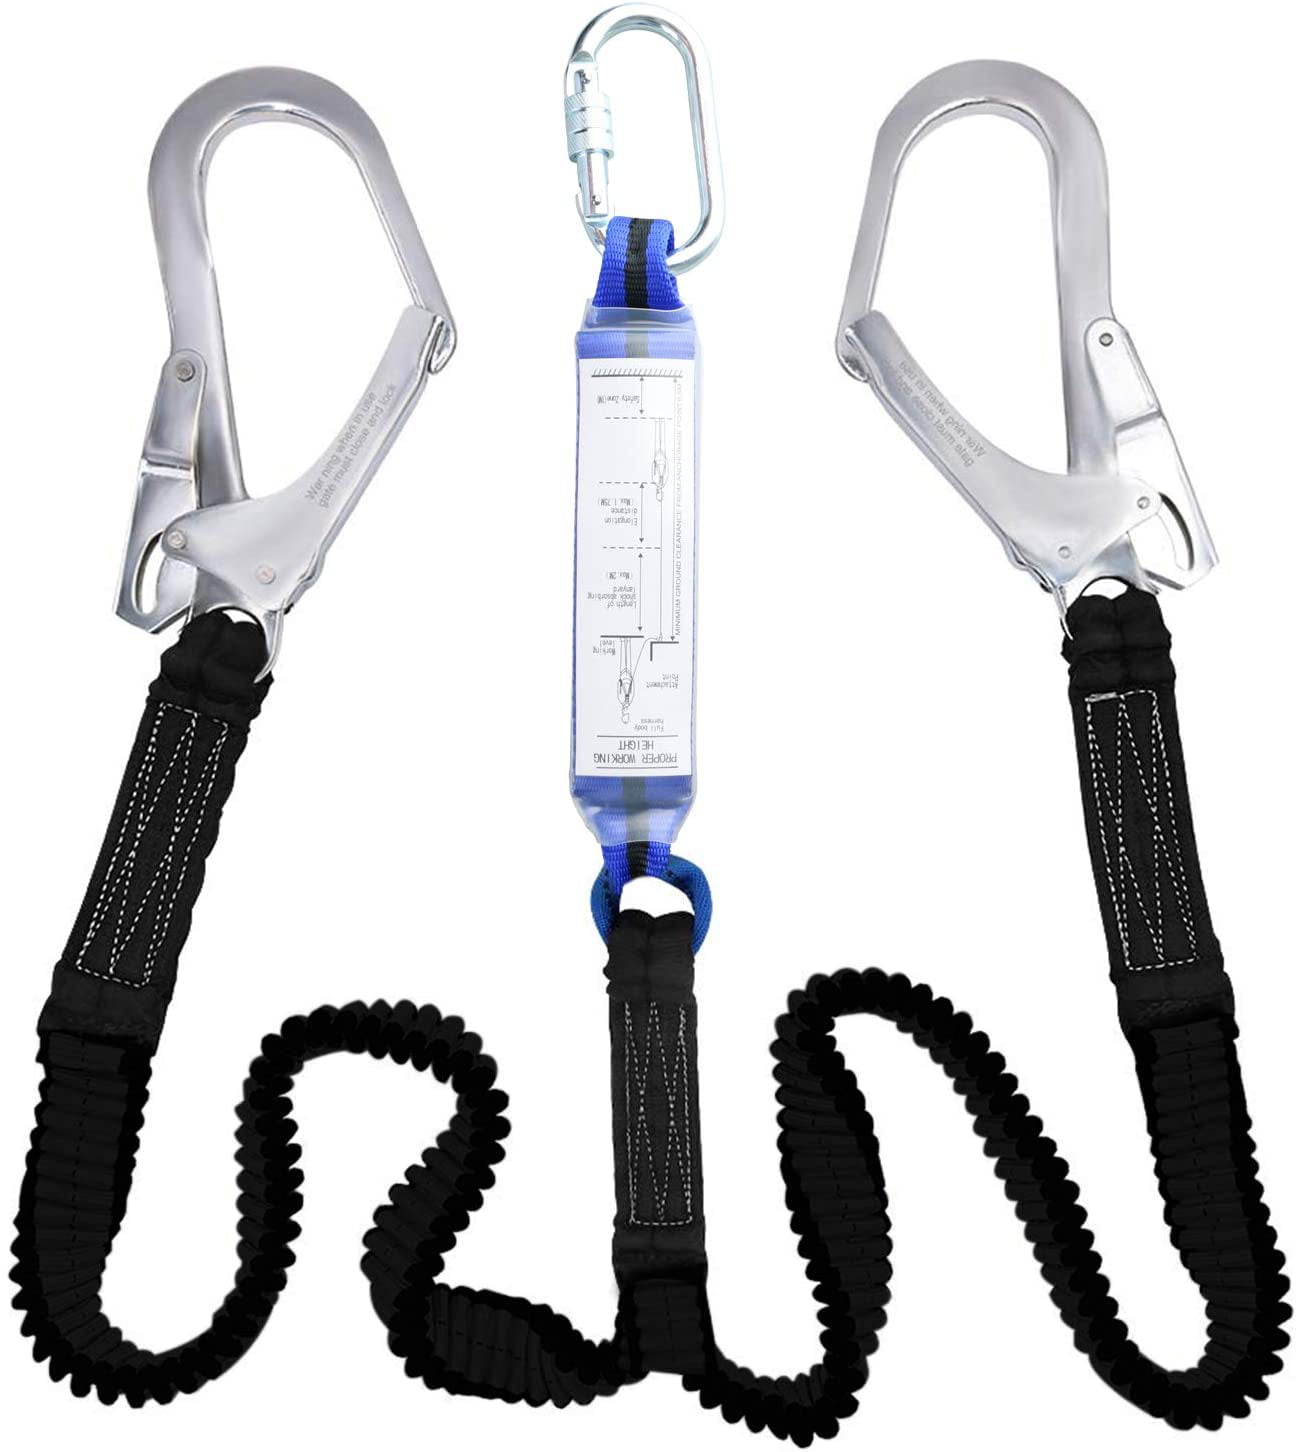 Double Leg Shock Absorbing Fall Arrest System for Climbing and Construction Safety Harness Y-Shaped Retractable Fall Protection Safety Harness Lanyard with 2 Hooks and 1 Steel Snap Hook 